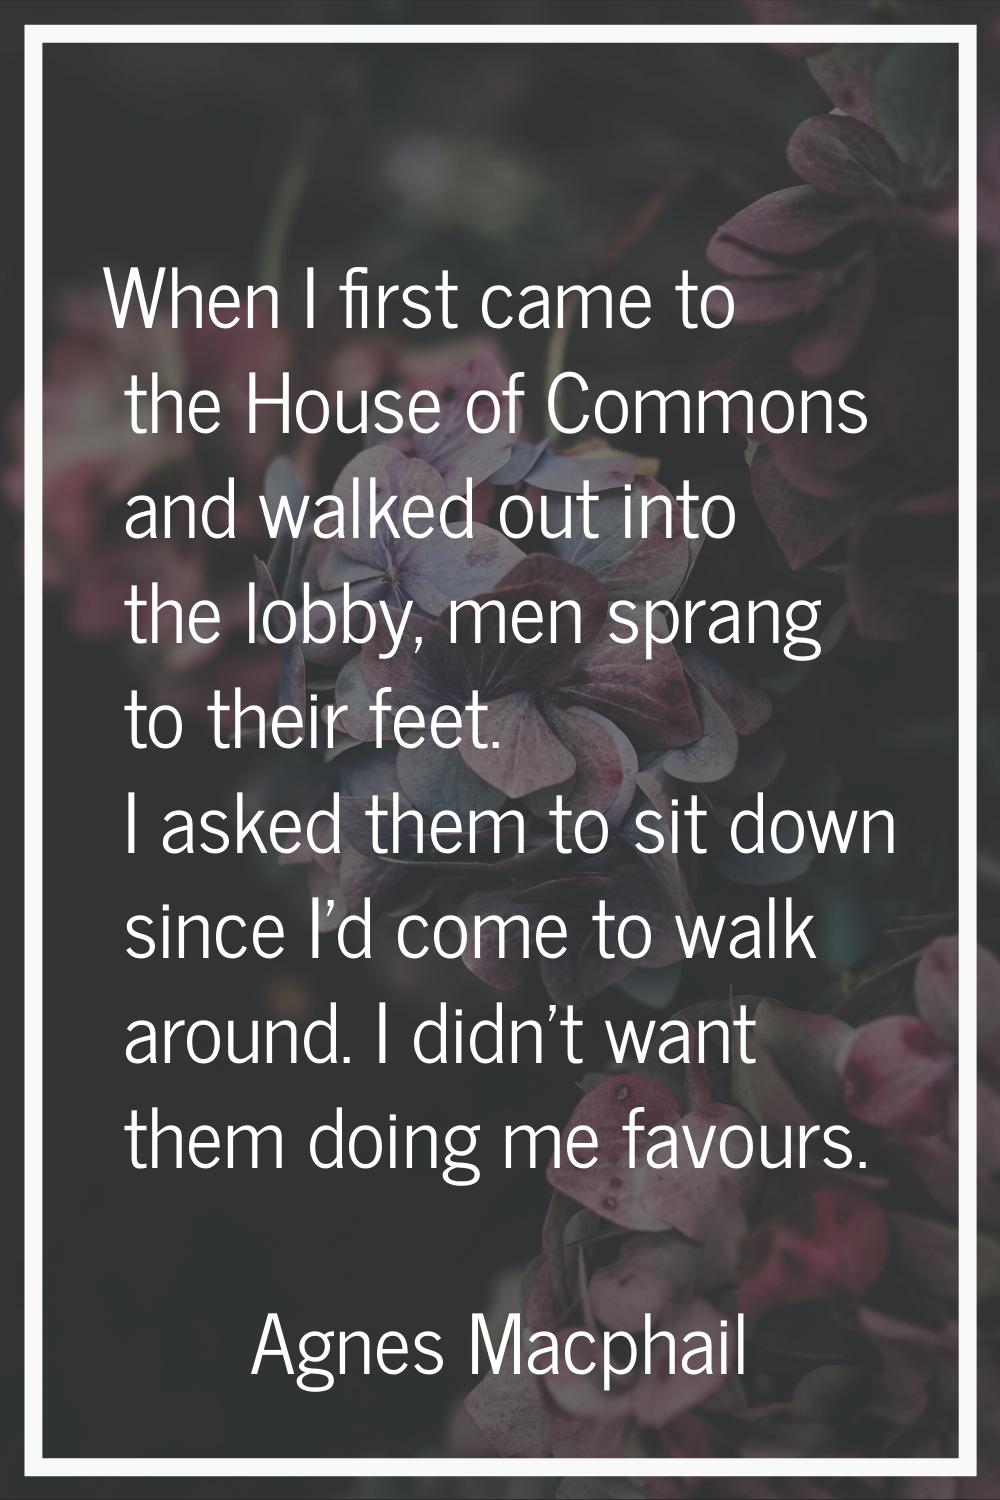 When I first came to the House of Commons and walked out into the lobby, men sprang to their feet. 